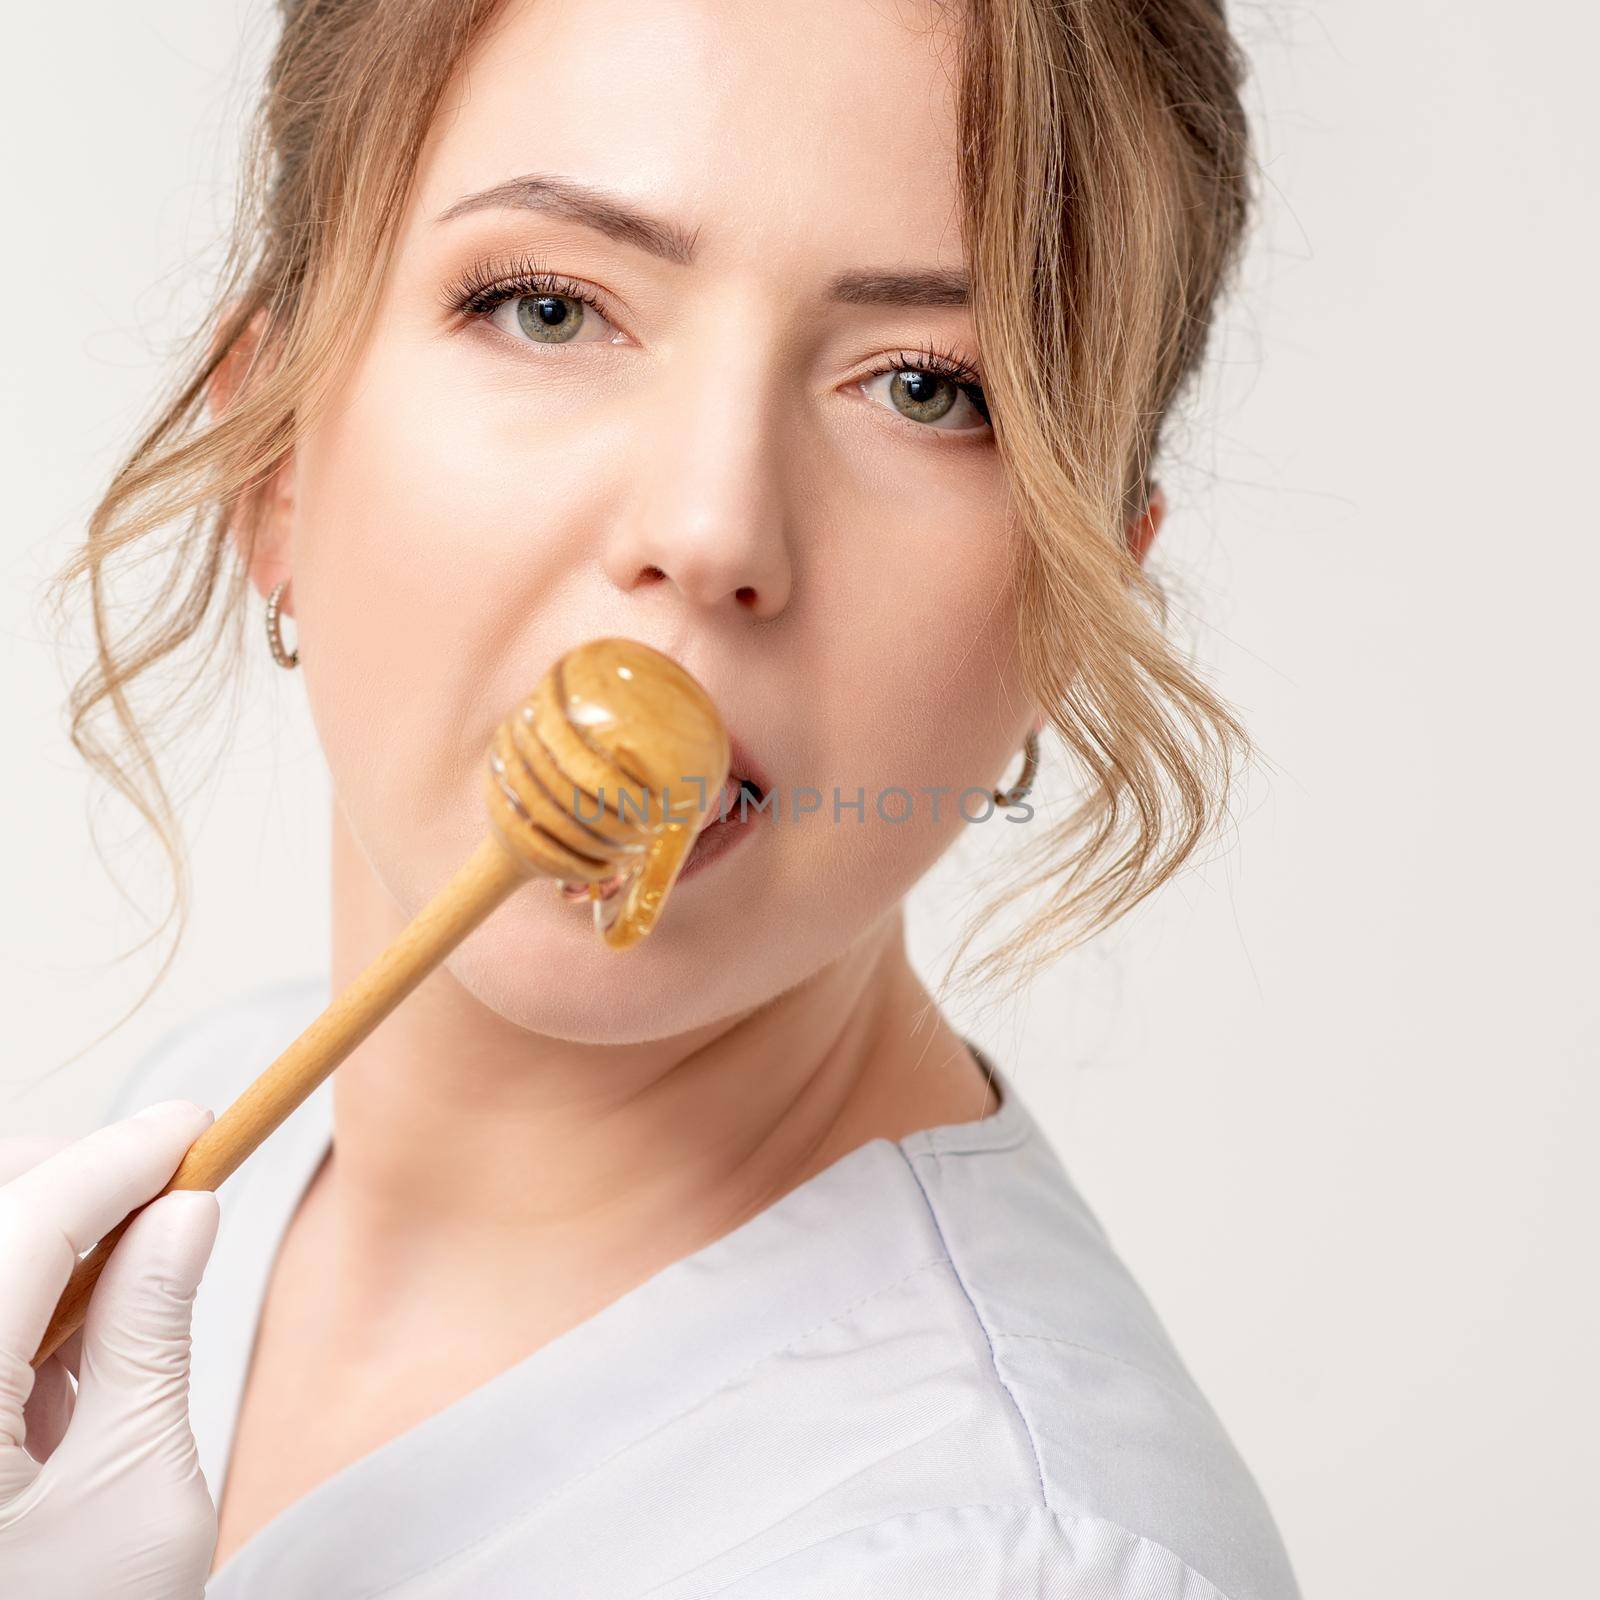 Portrait of beautiful young caucasian woman eating honey with wooden spoon on white background